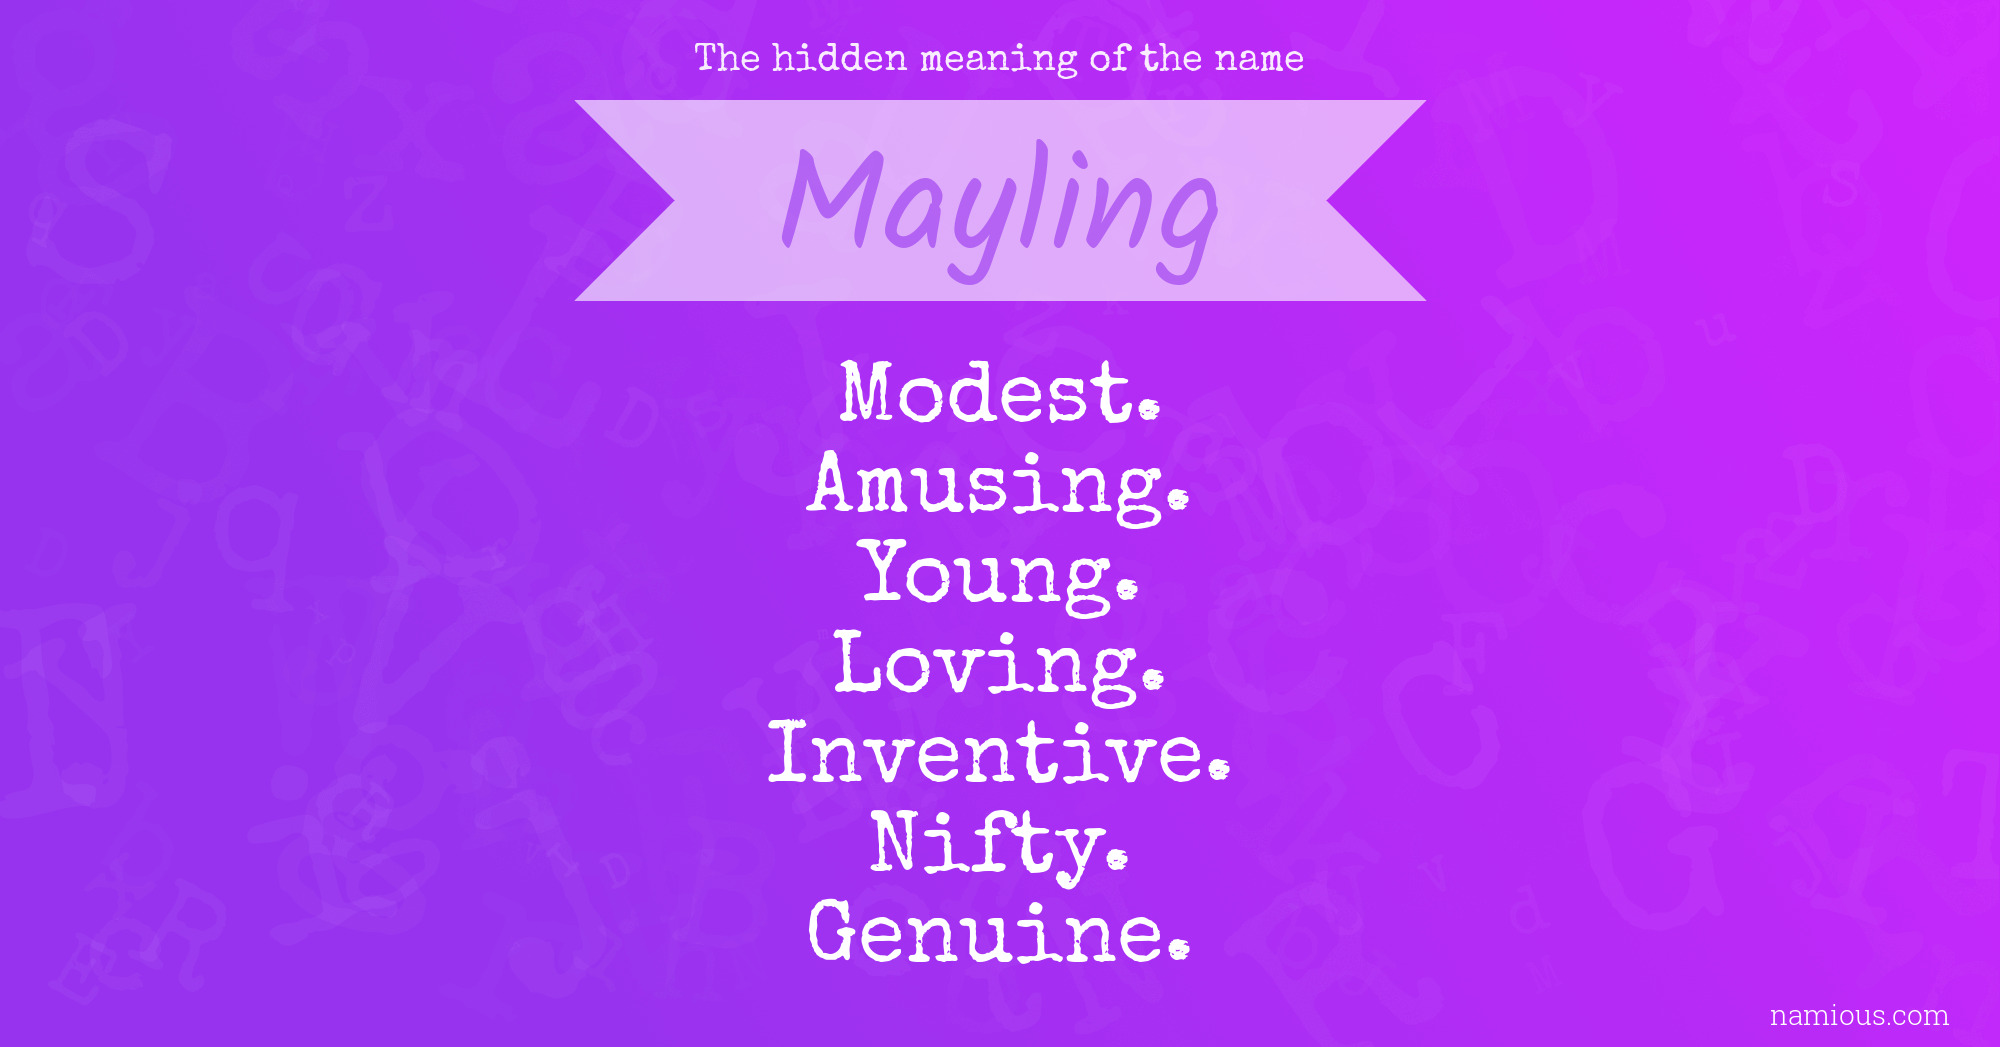 The hidden meaning of the name Mayling